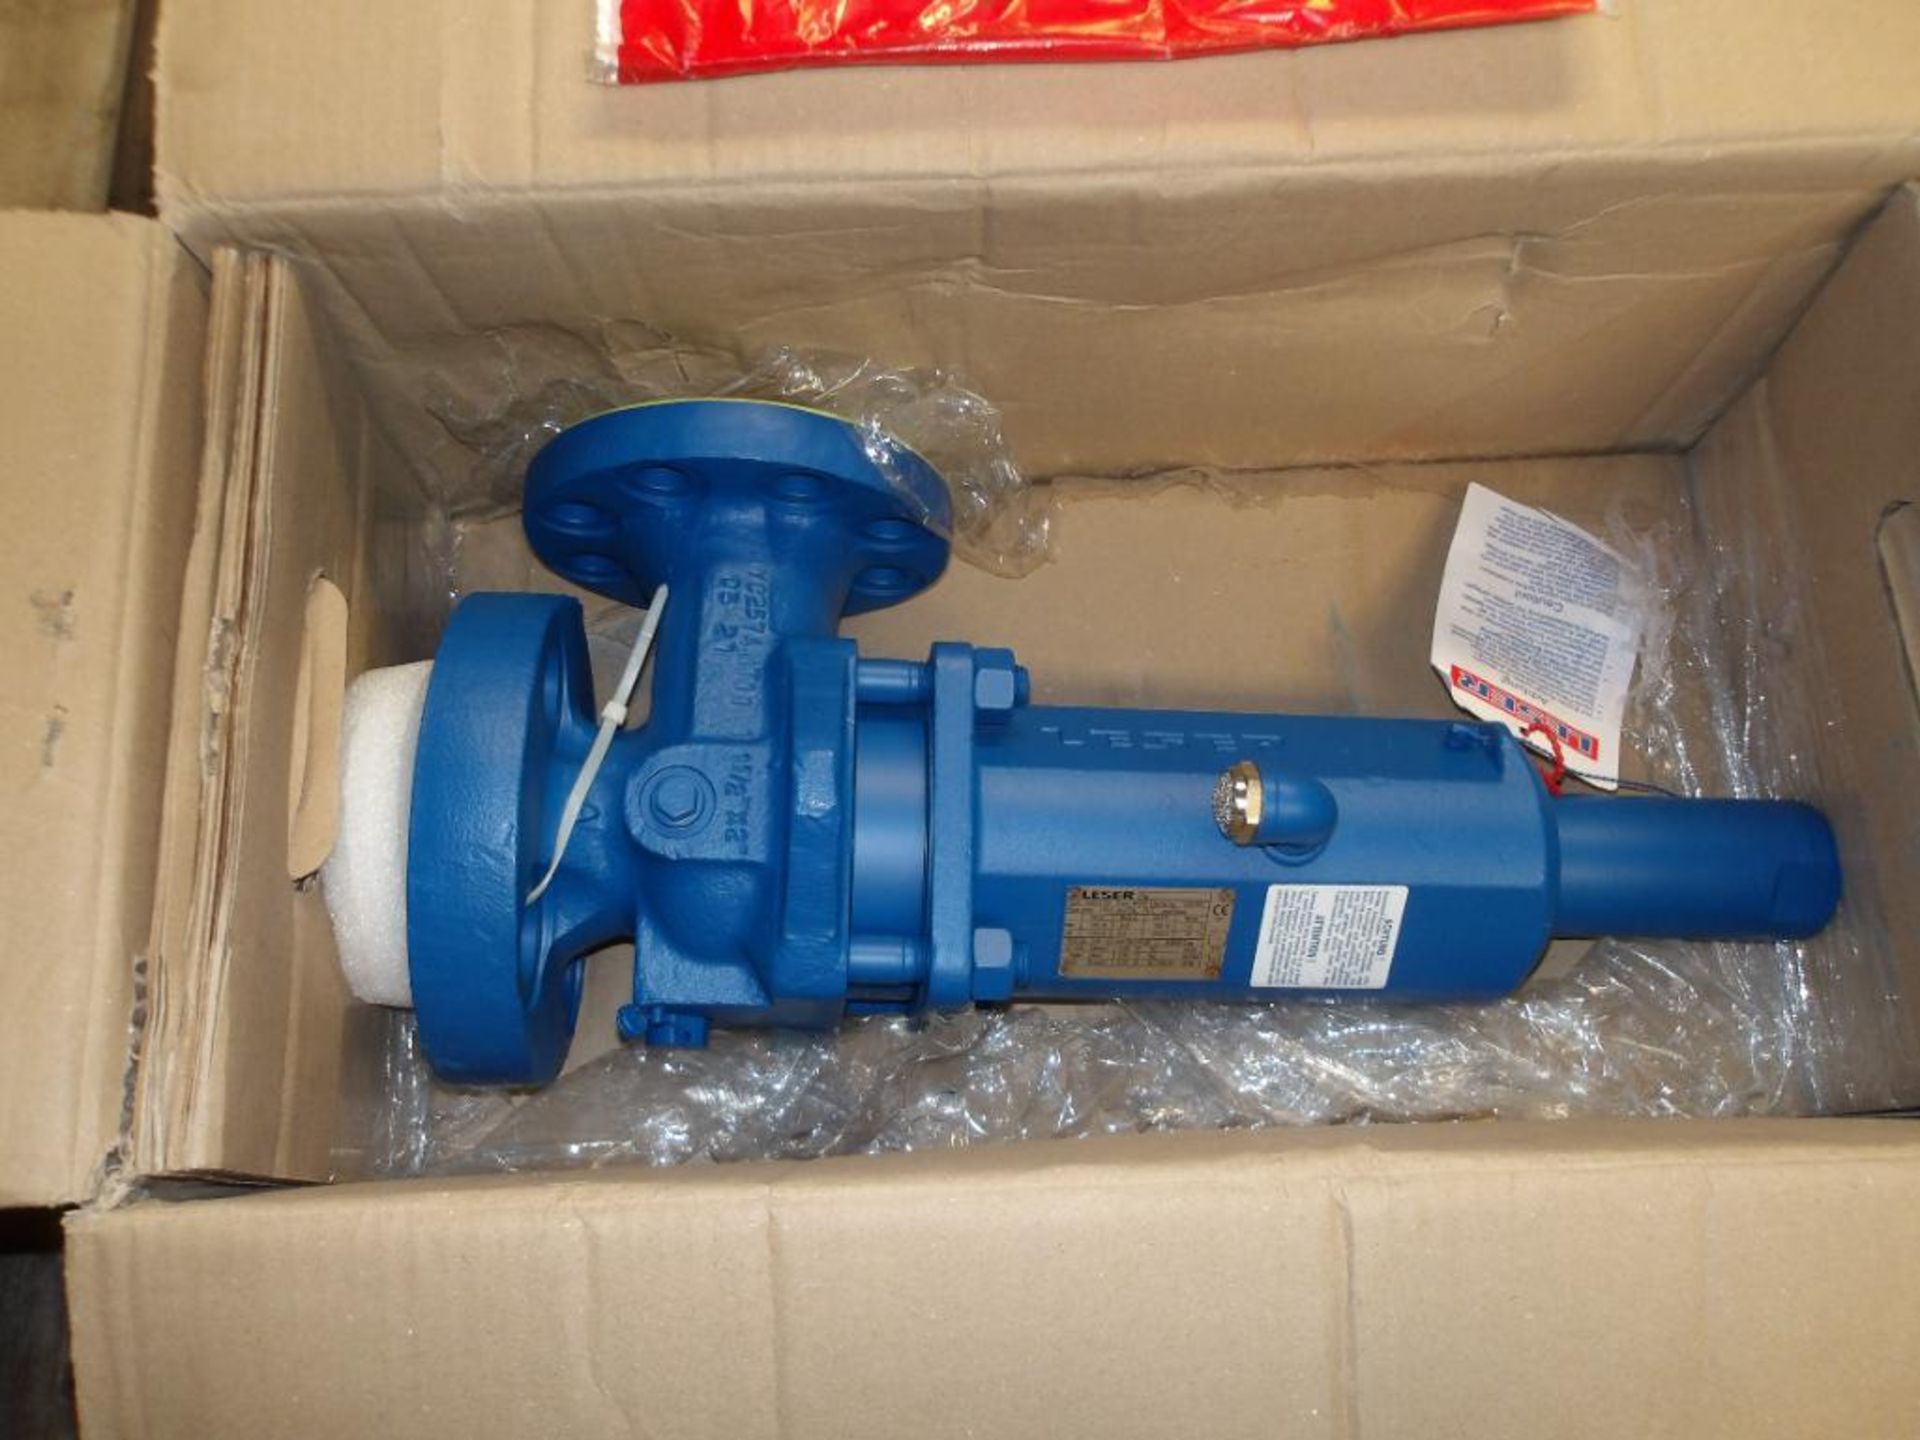 (2) Leser Pressure Relief Valves, Type 5262.0182, Size: 1-1/2 (New in Box)